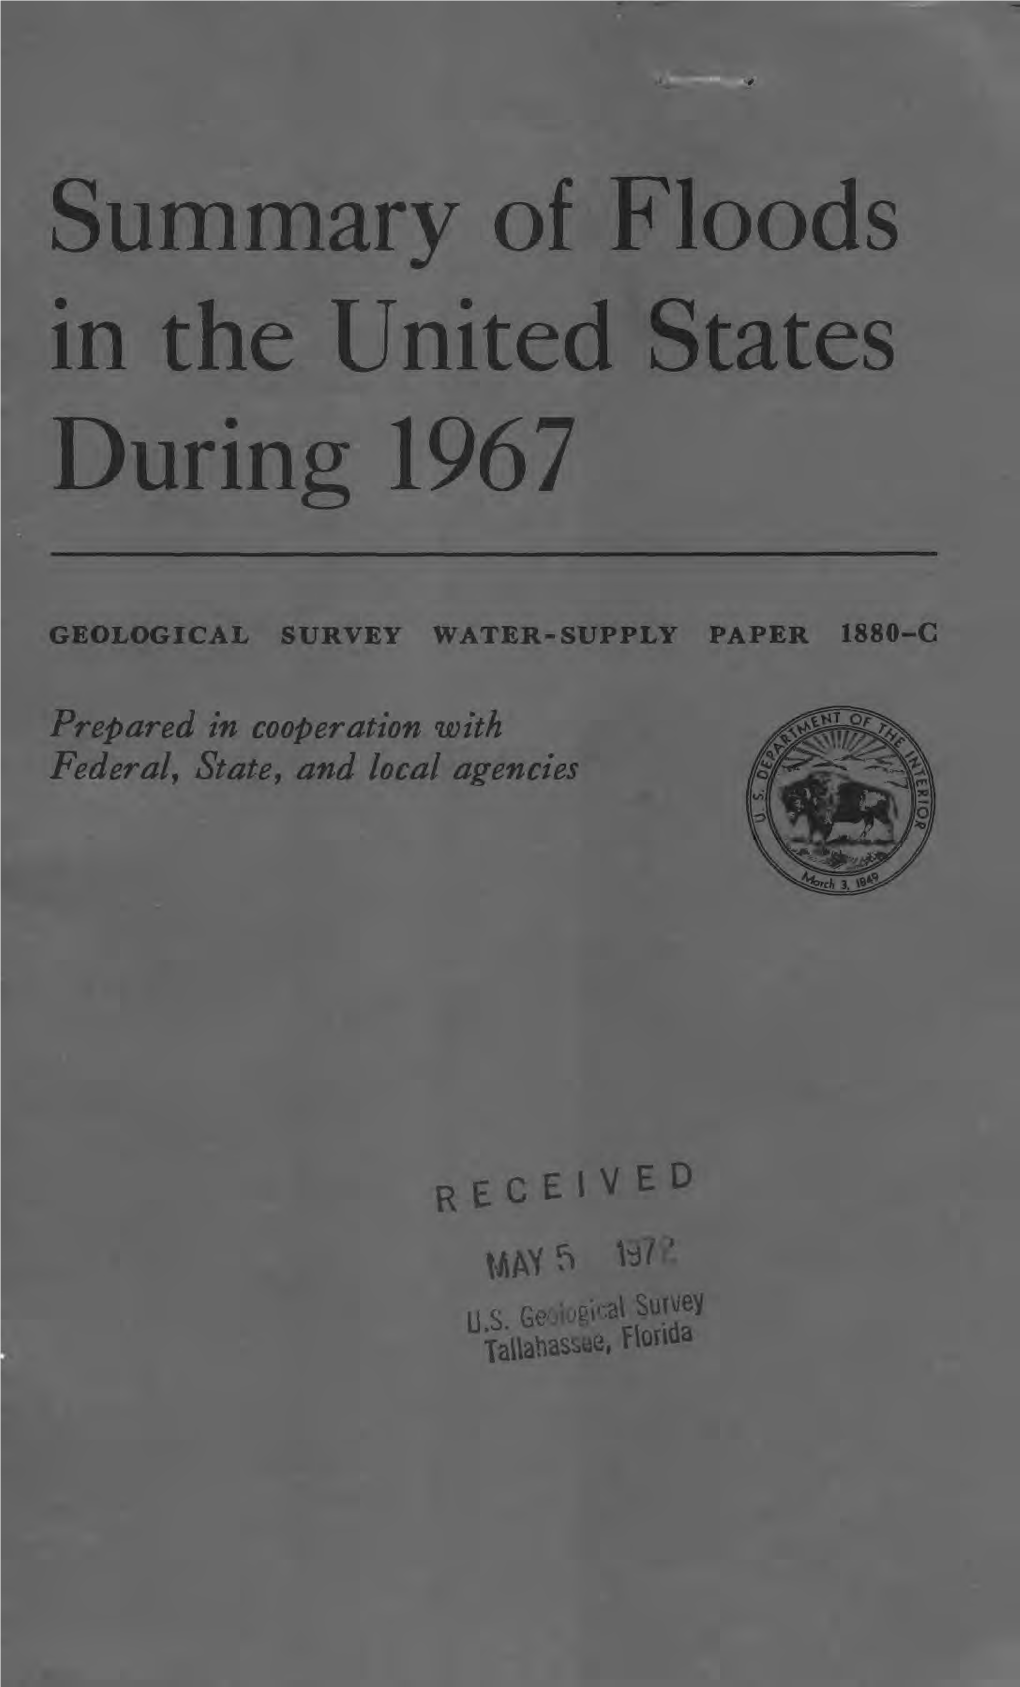 Summary of Floods in the United States During 1967